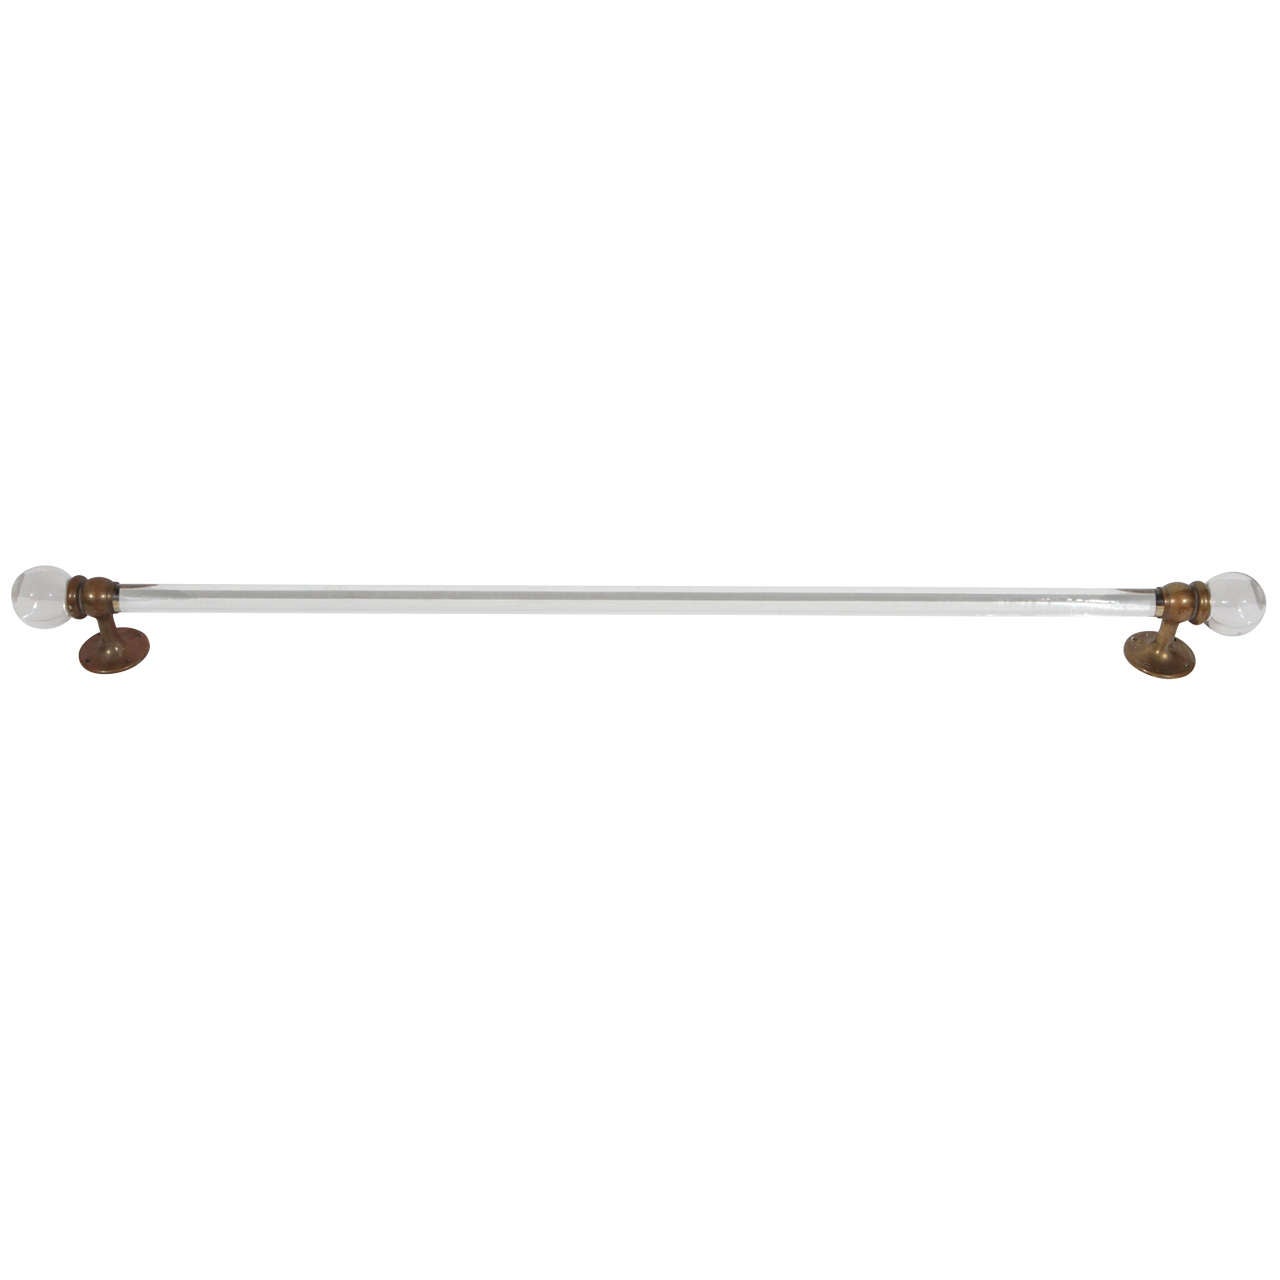 Bathroom Towel Bars with Brass and Round Glass Ends